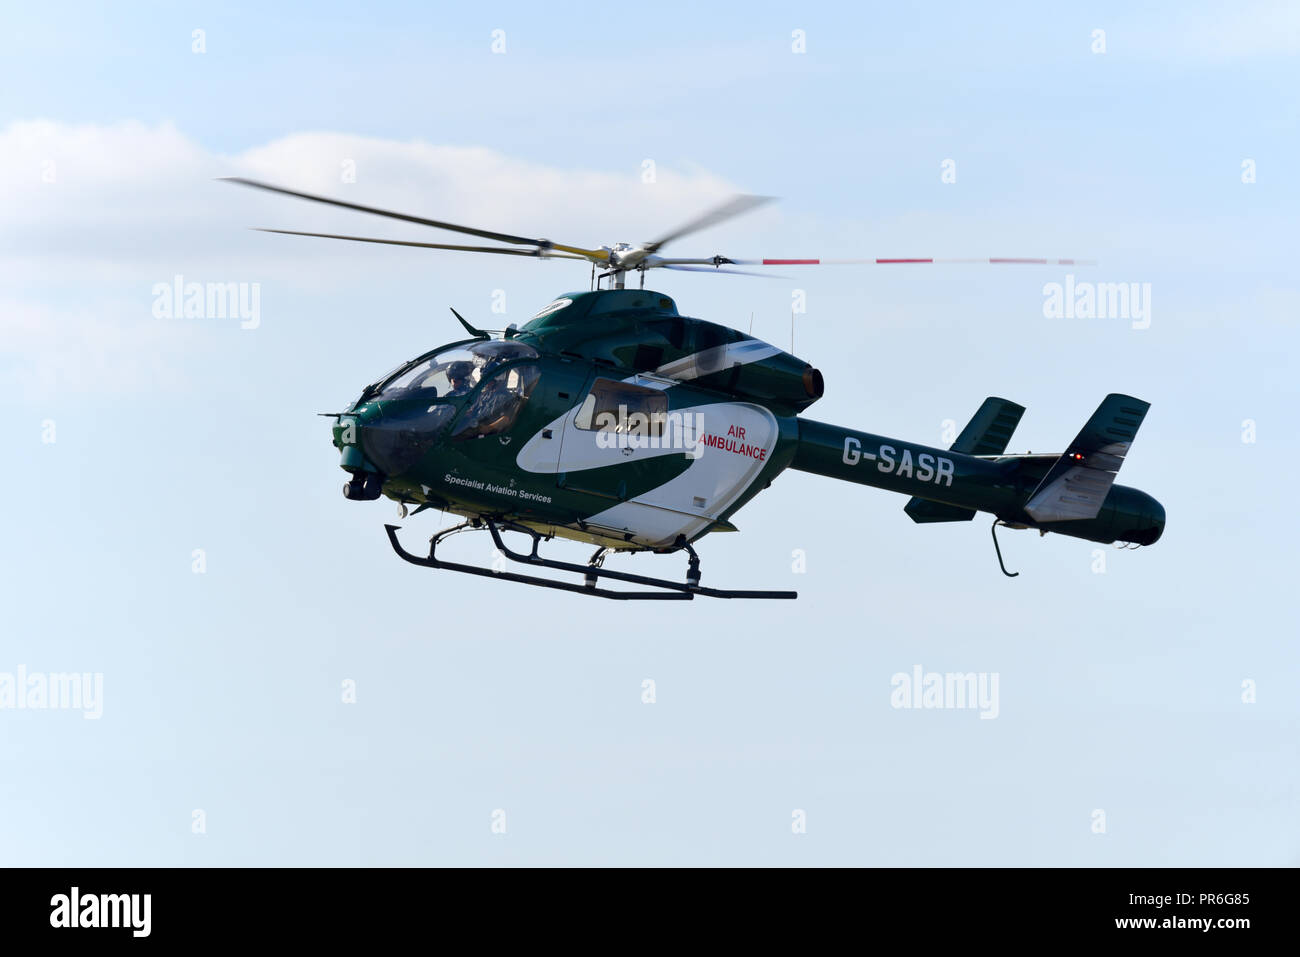 MD Helicopter MD900 Explorer G-SASR of Specialist Aviation Services Ltd at North Weald airfield. Air Ambulance service with night HEMS capable. Stock Photo